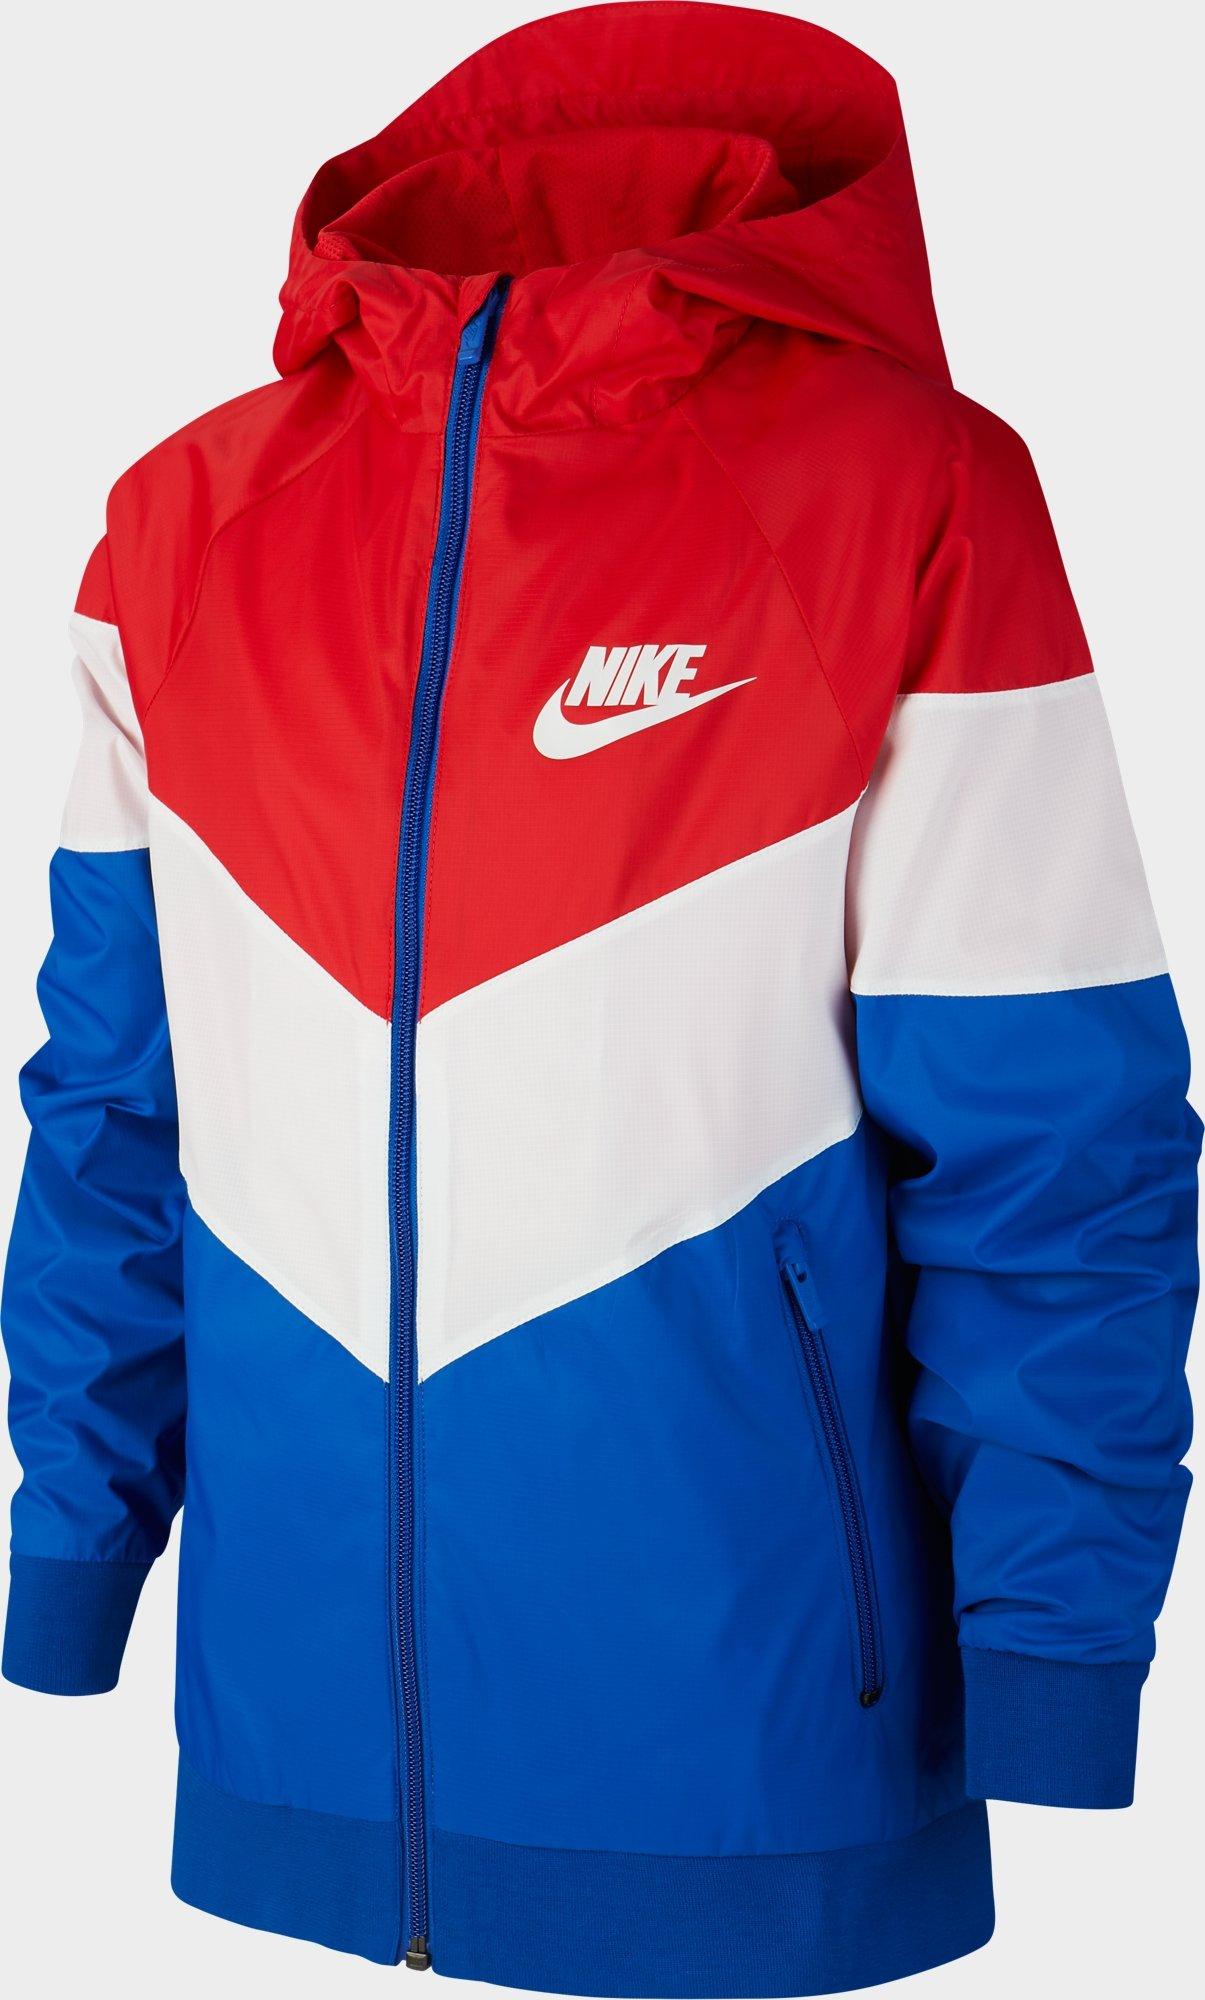 nike jacket in red